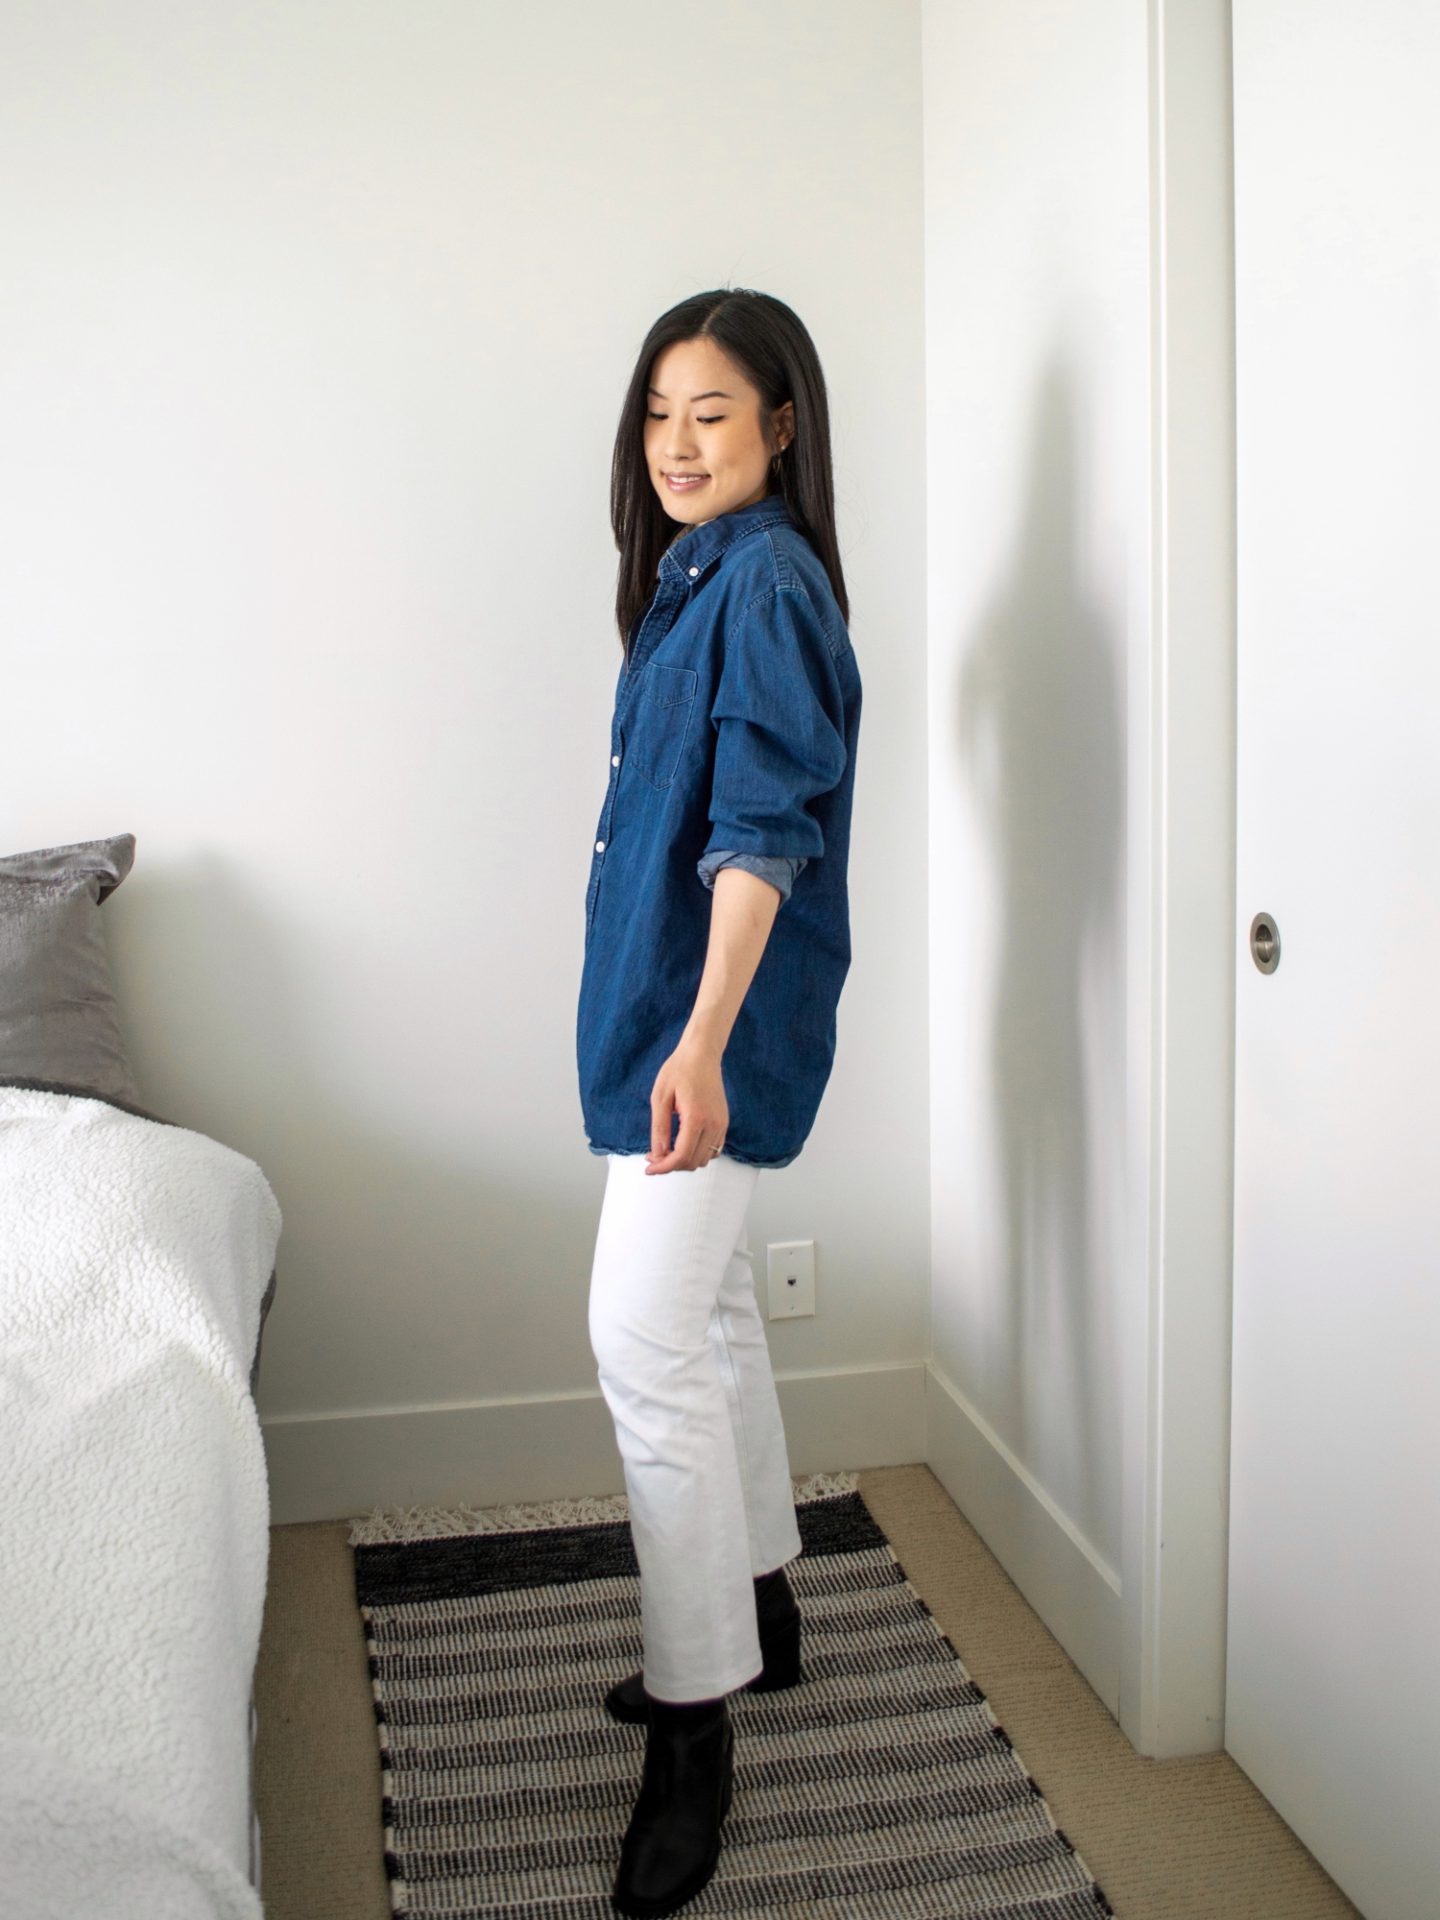 Her Simple Sole - Outfit details: cotton denim button down shirt, white straight leg jeans, black ankle boots